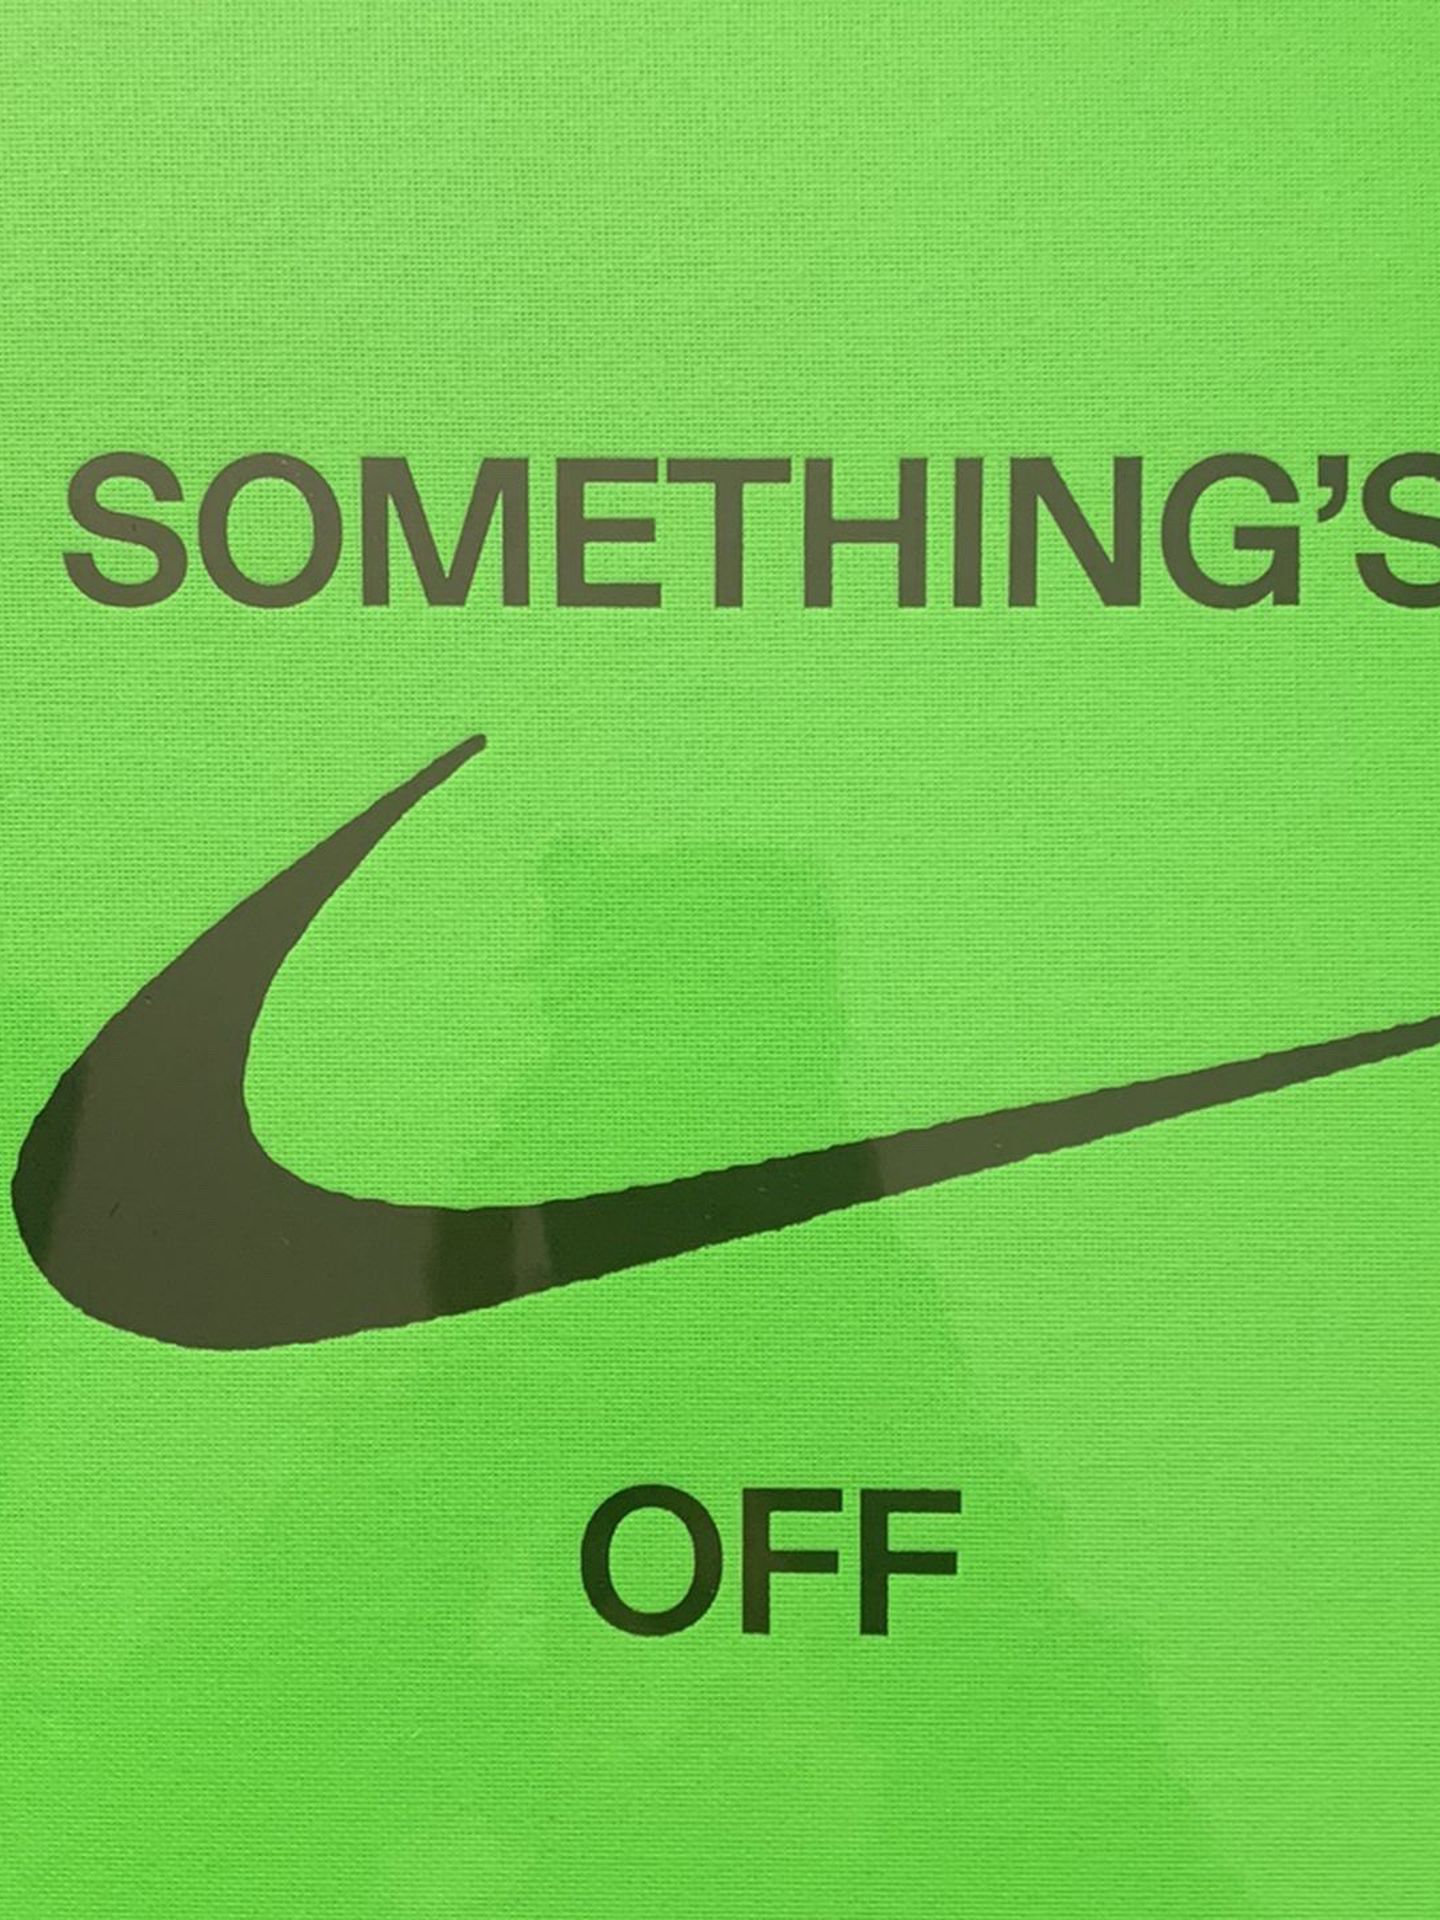 Virgil Abloh ICONS “Something’s OFF” Book